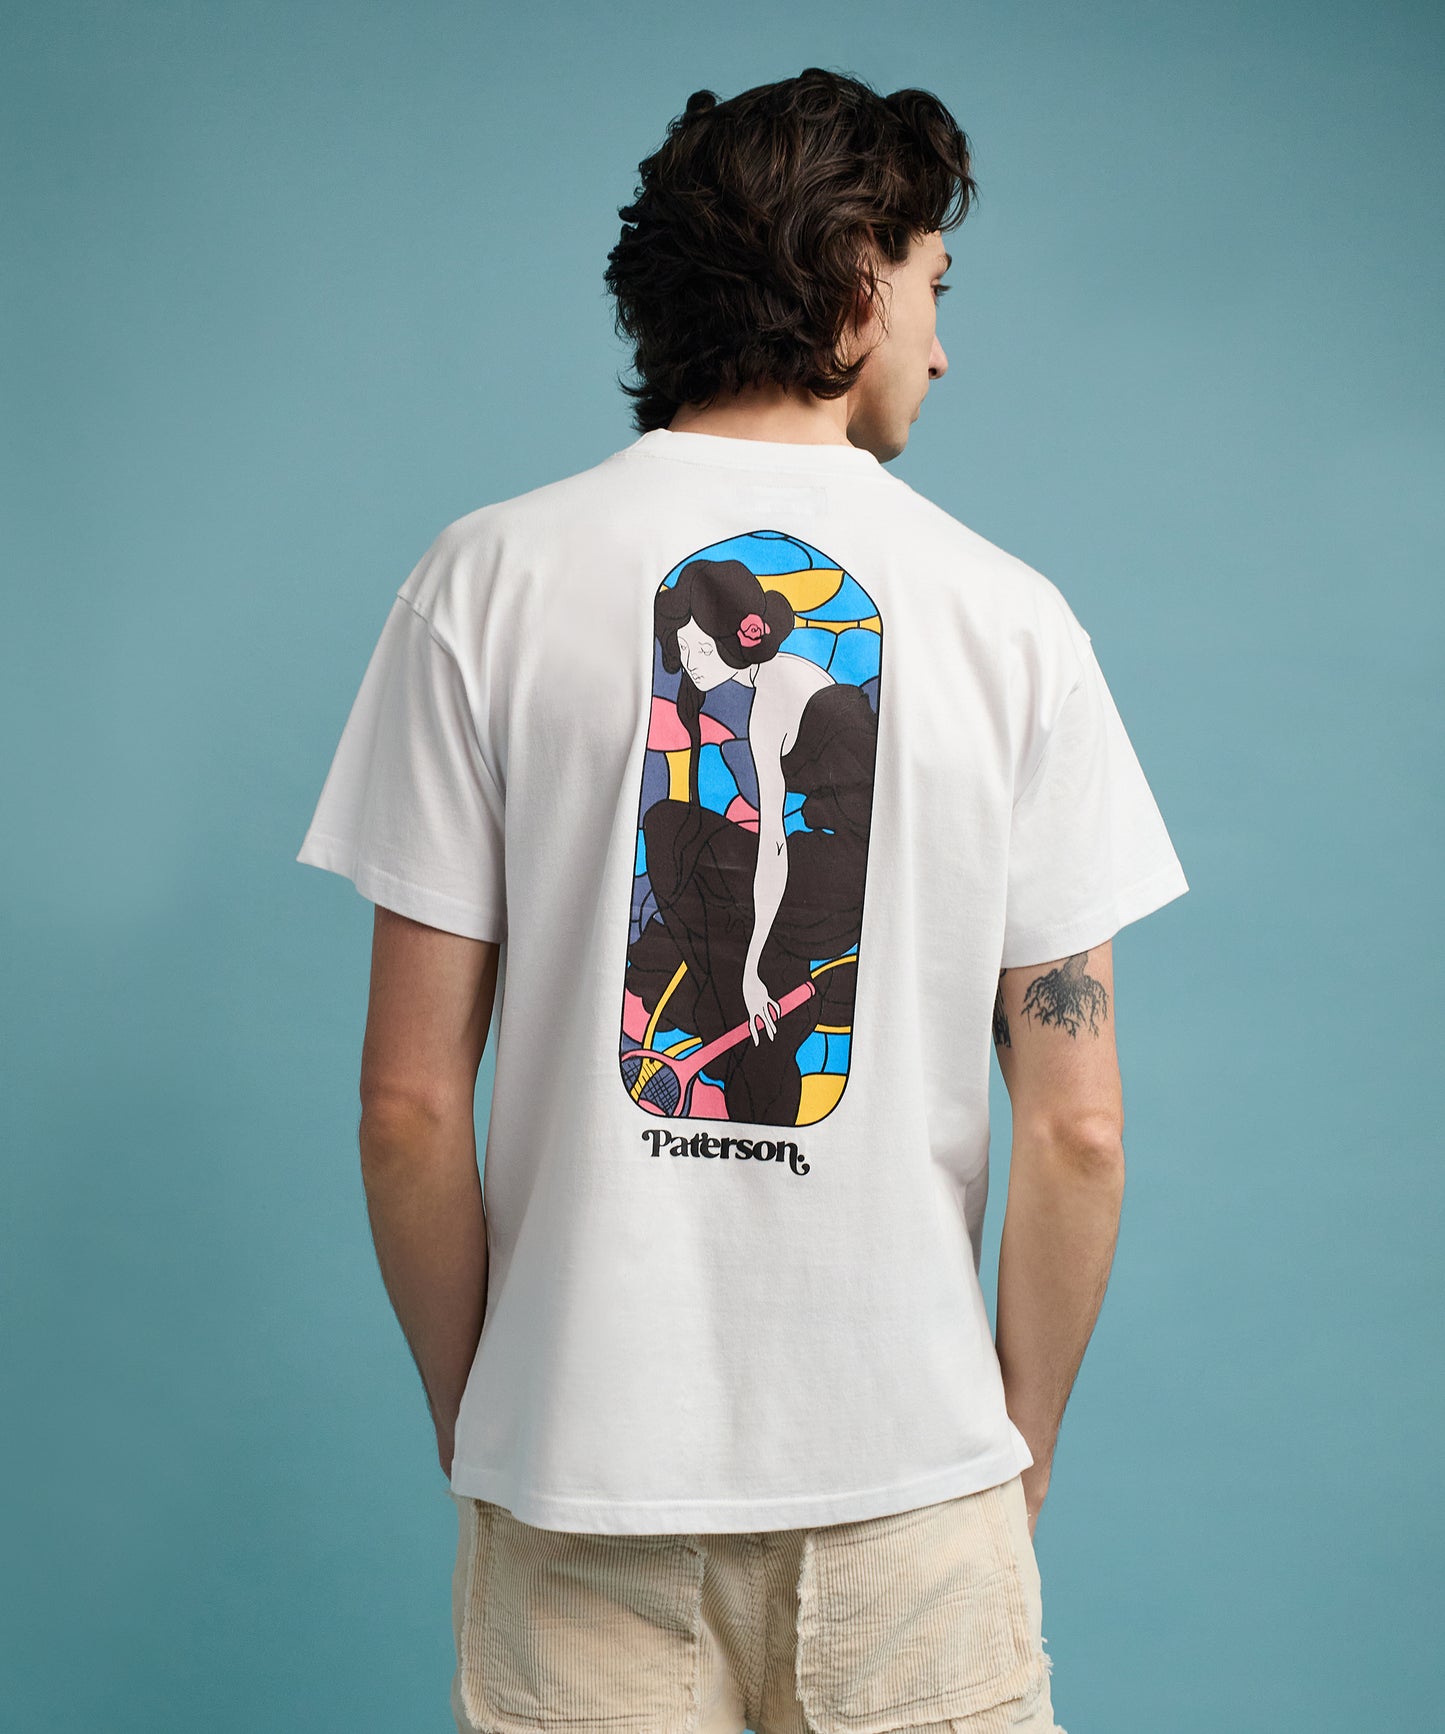 Stained Glass Short Sleeve Tee - White